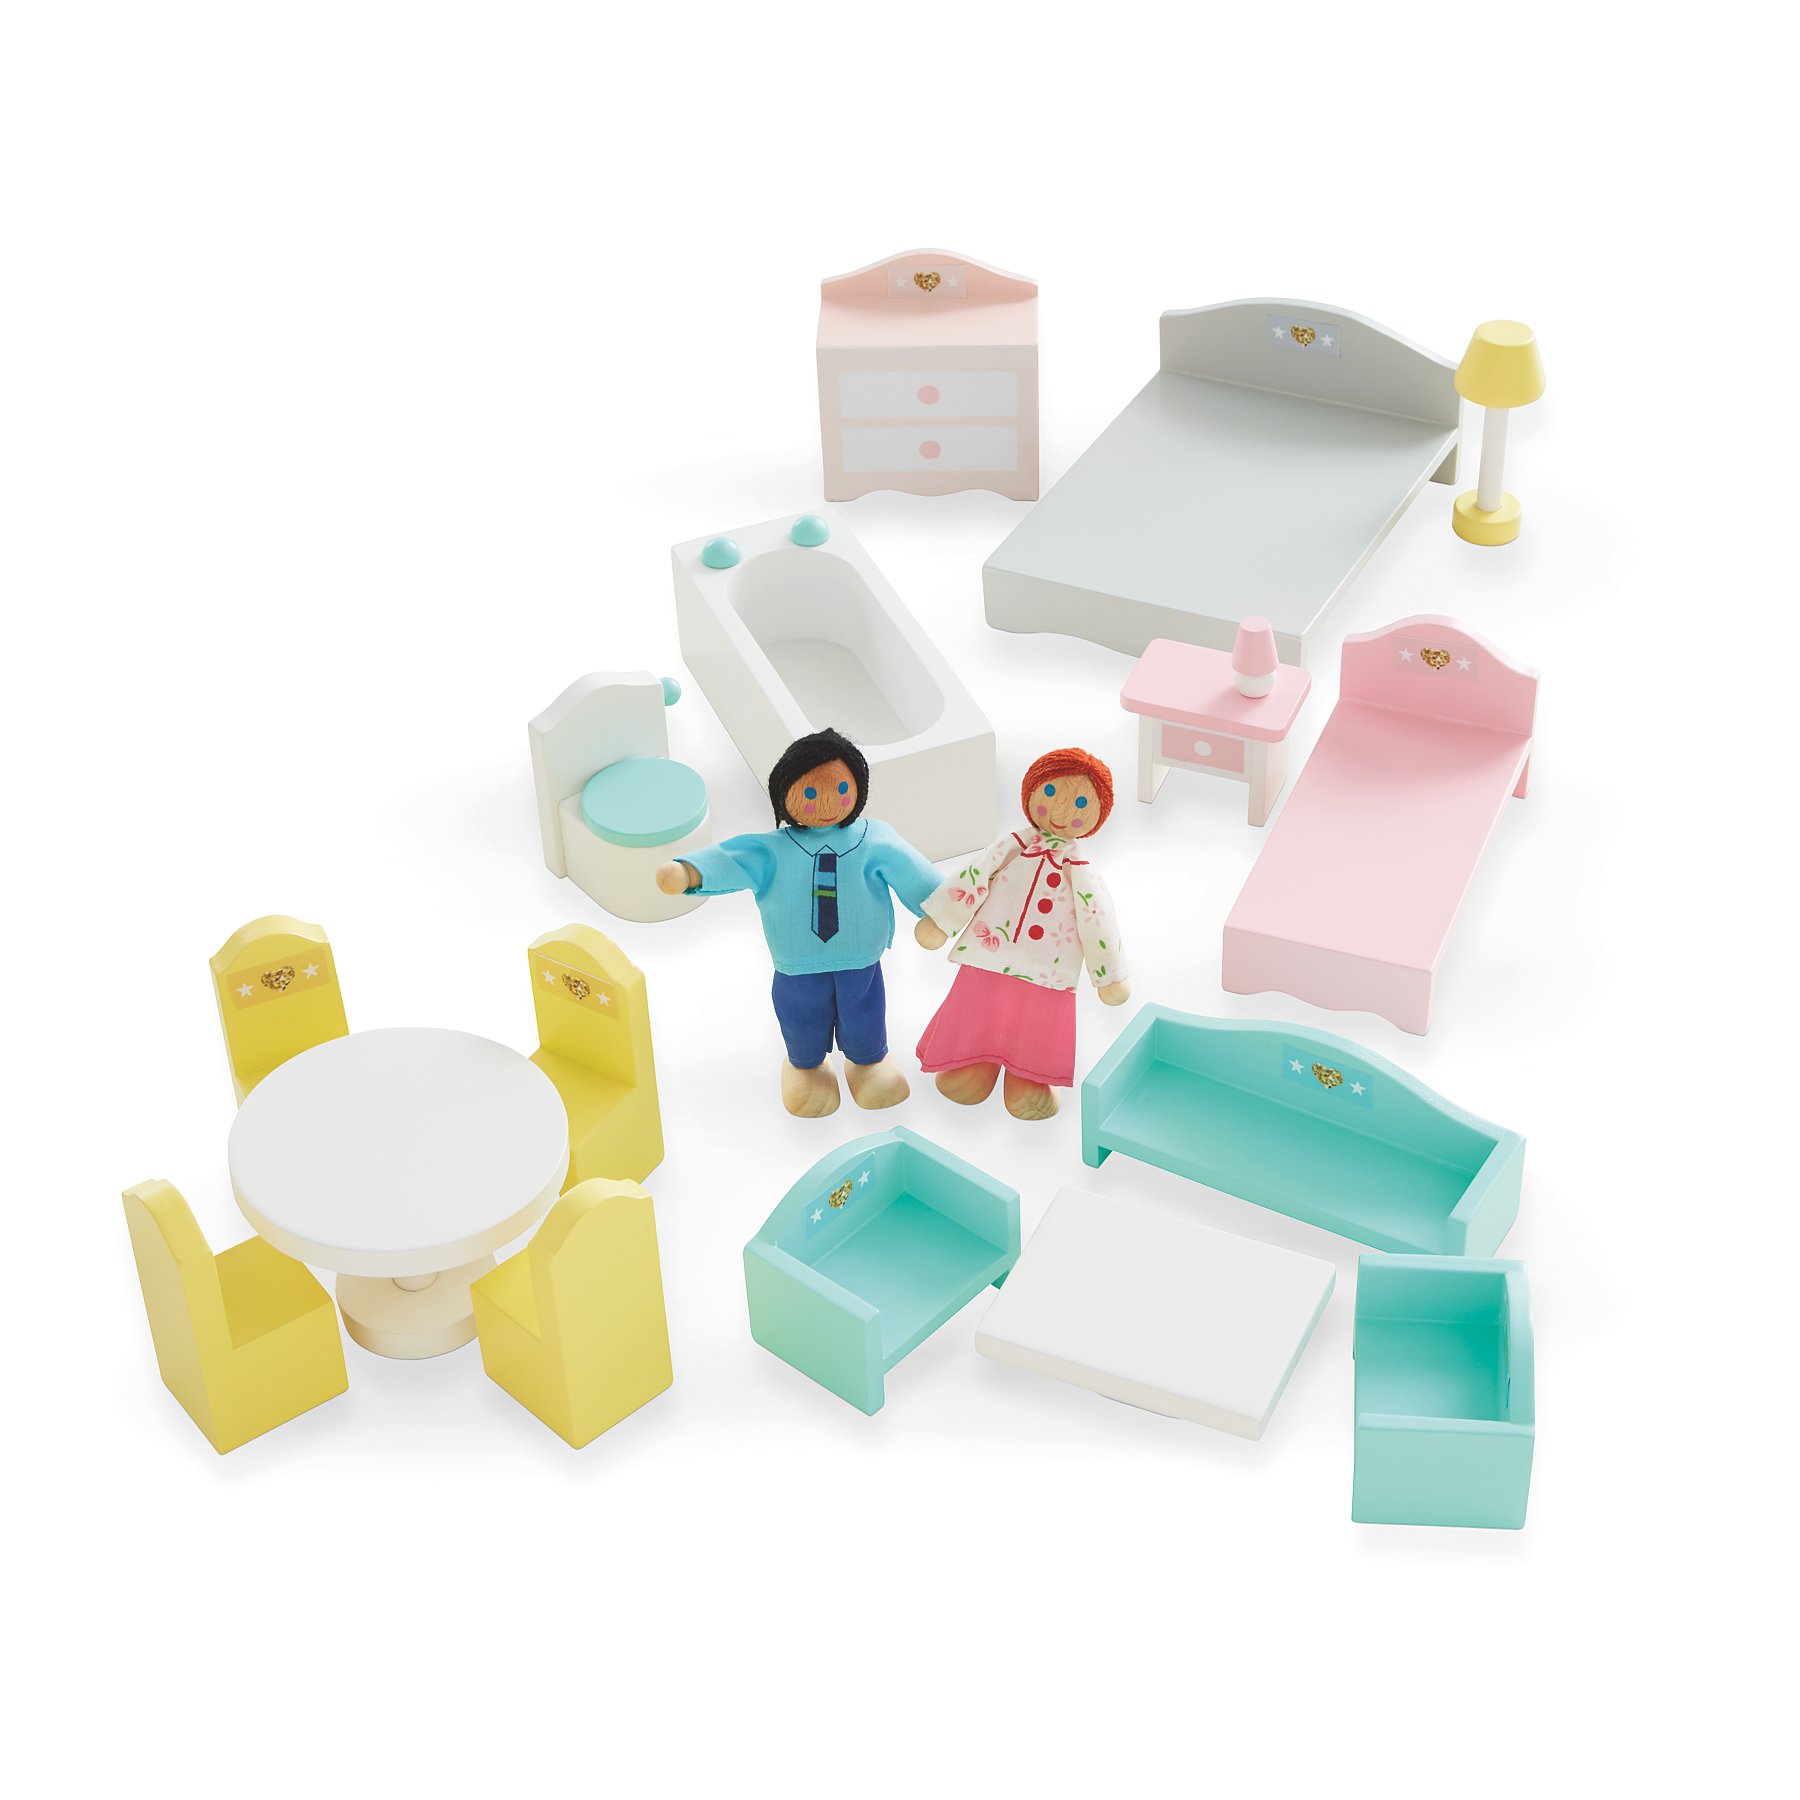 Wooden Dollhouse Furniture Set Toys Character George